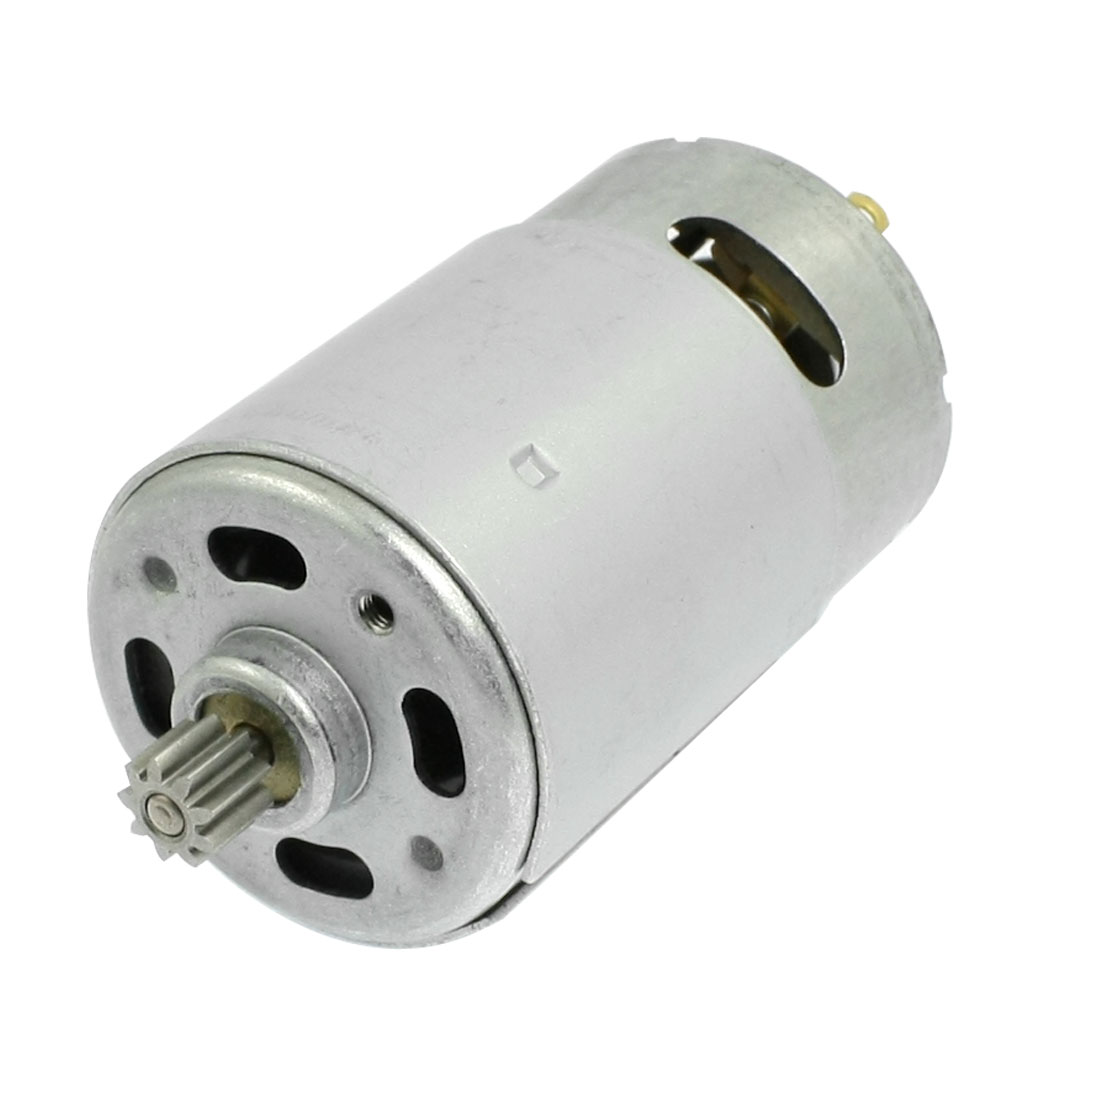 Unique Bargains DC 18V 9 Teeth Shank Gear Motor Replacement for Rechargeable Electric Drill